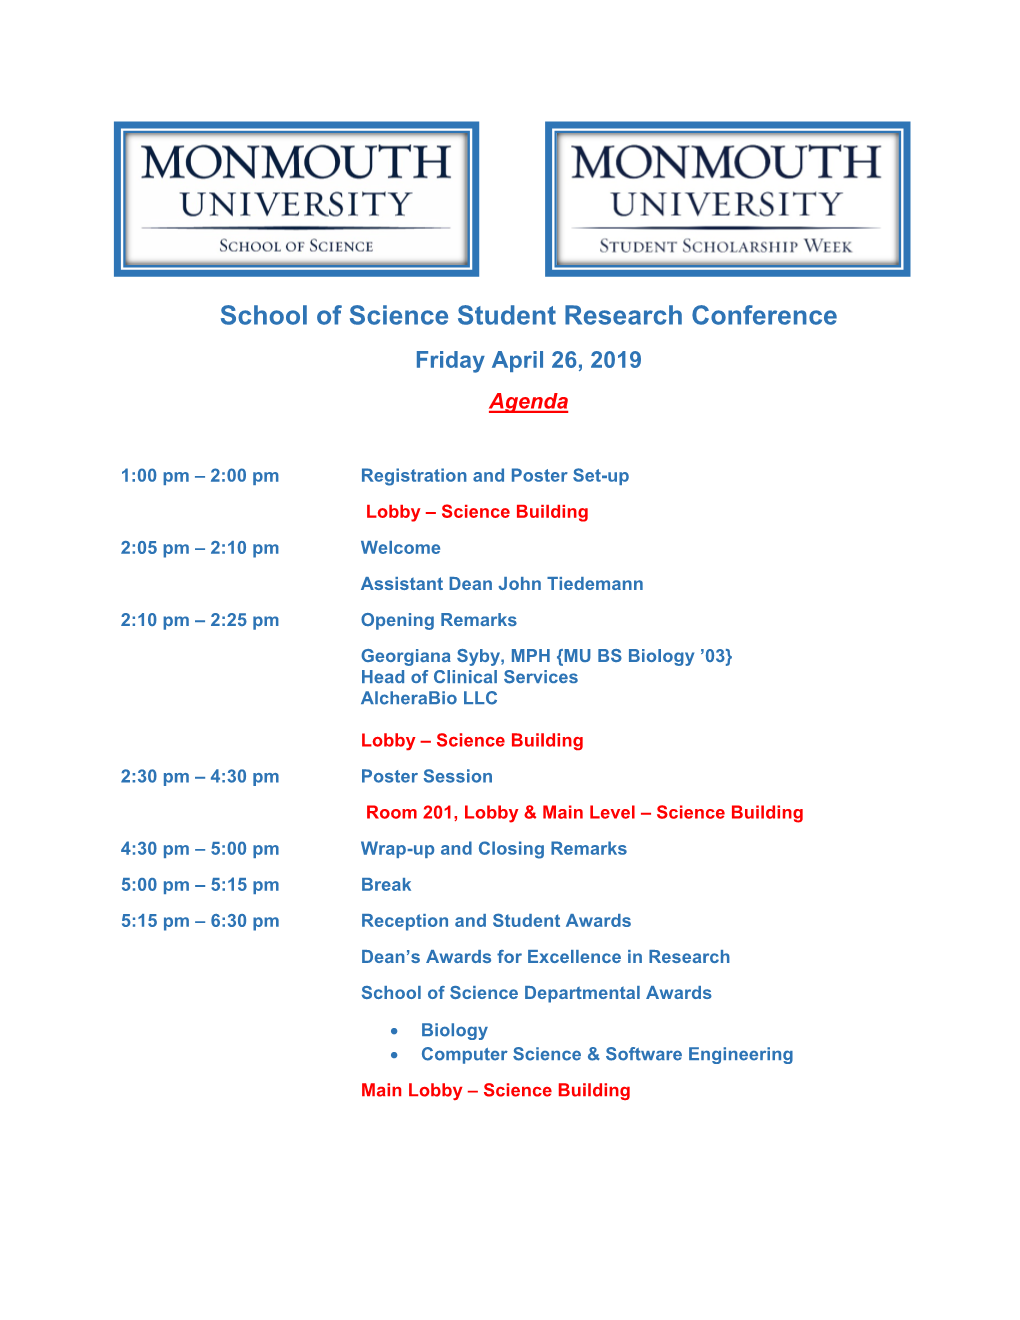 School of Science Student Research Conference Friday April 26, 2019 Agenda